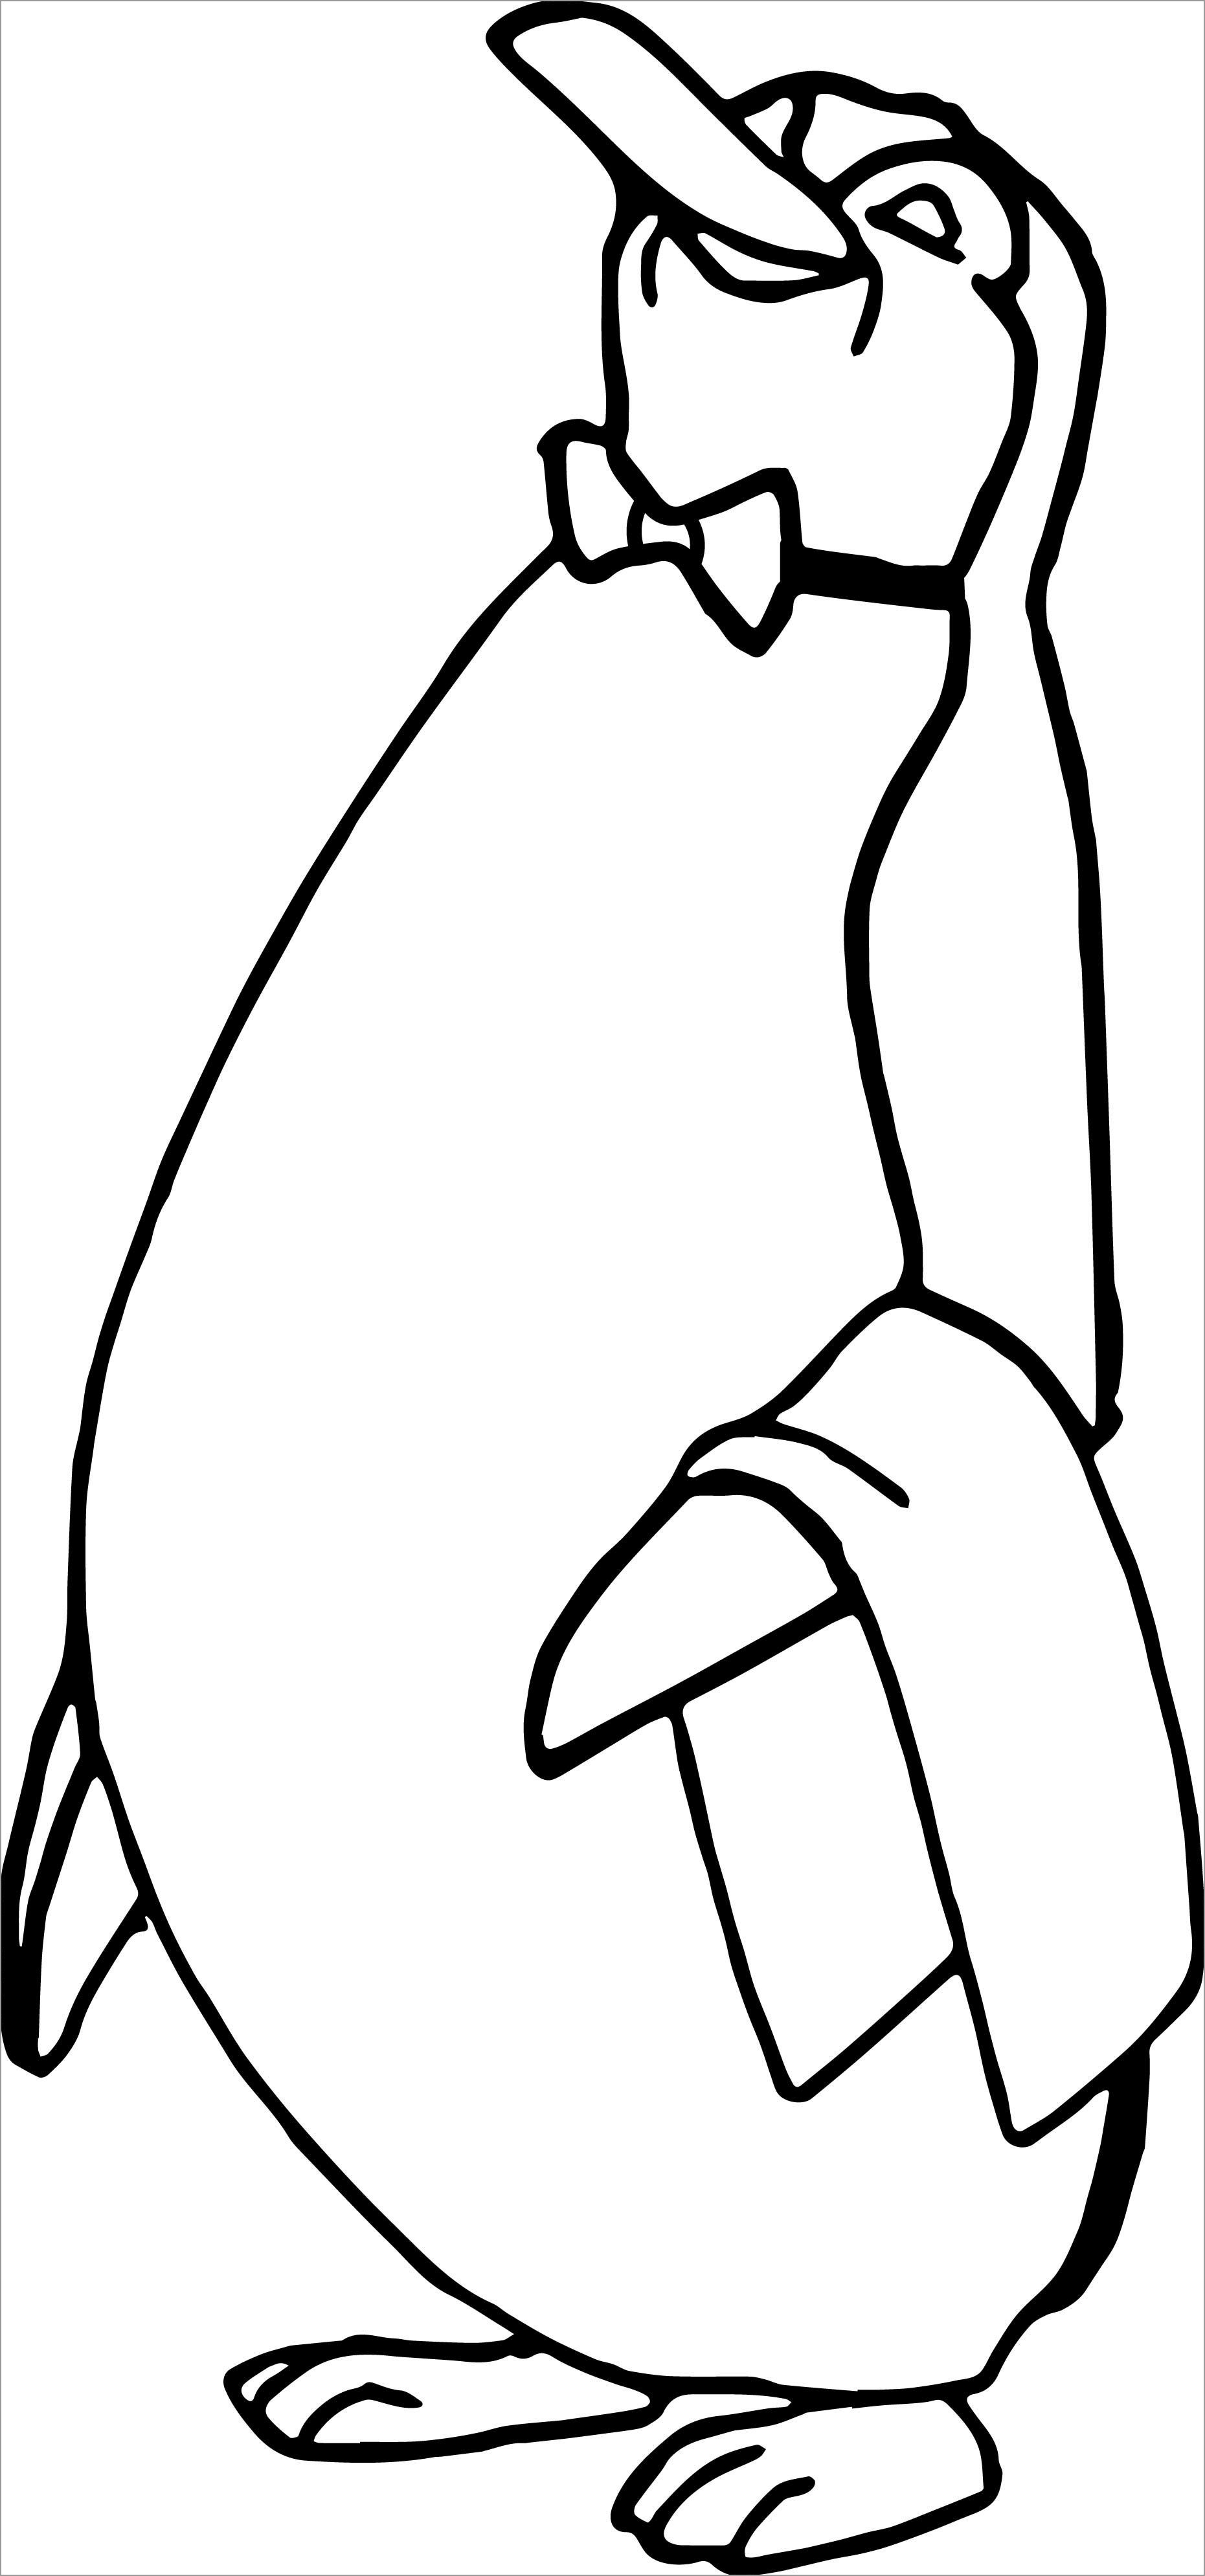 Luxury Penguin Coloring Page